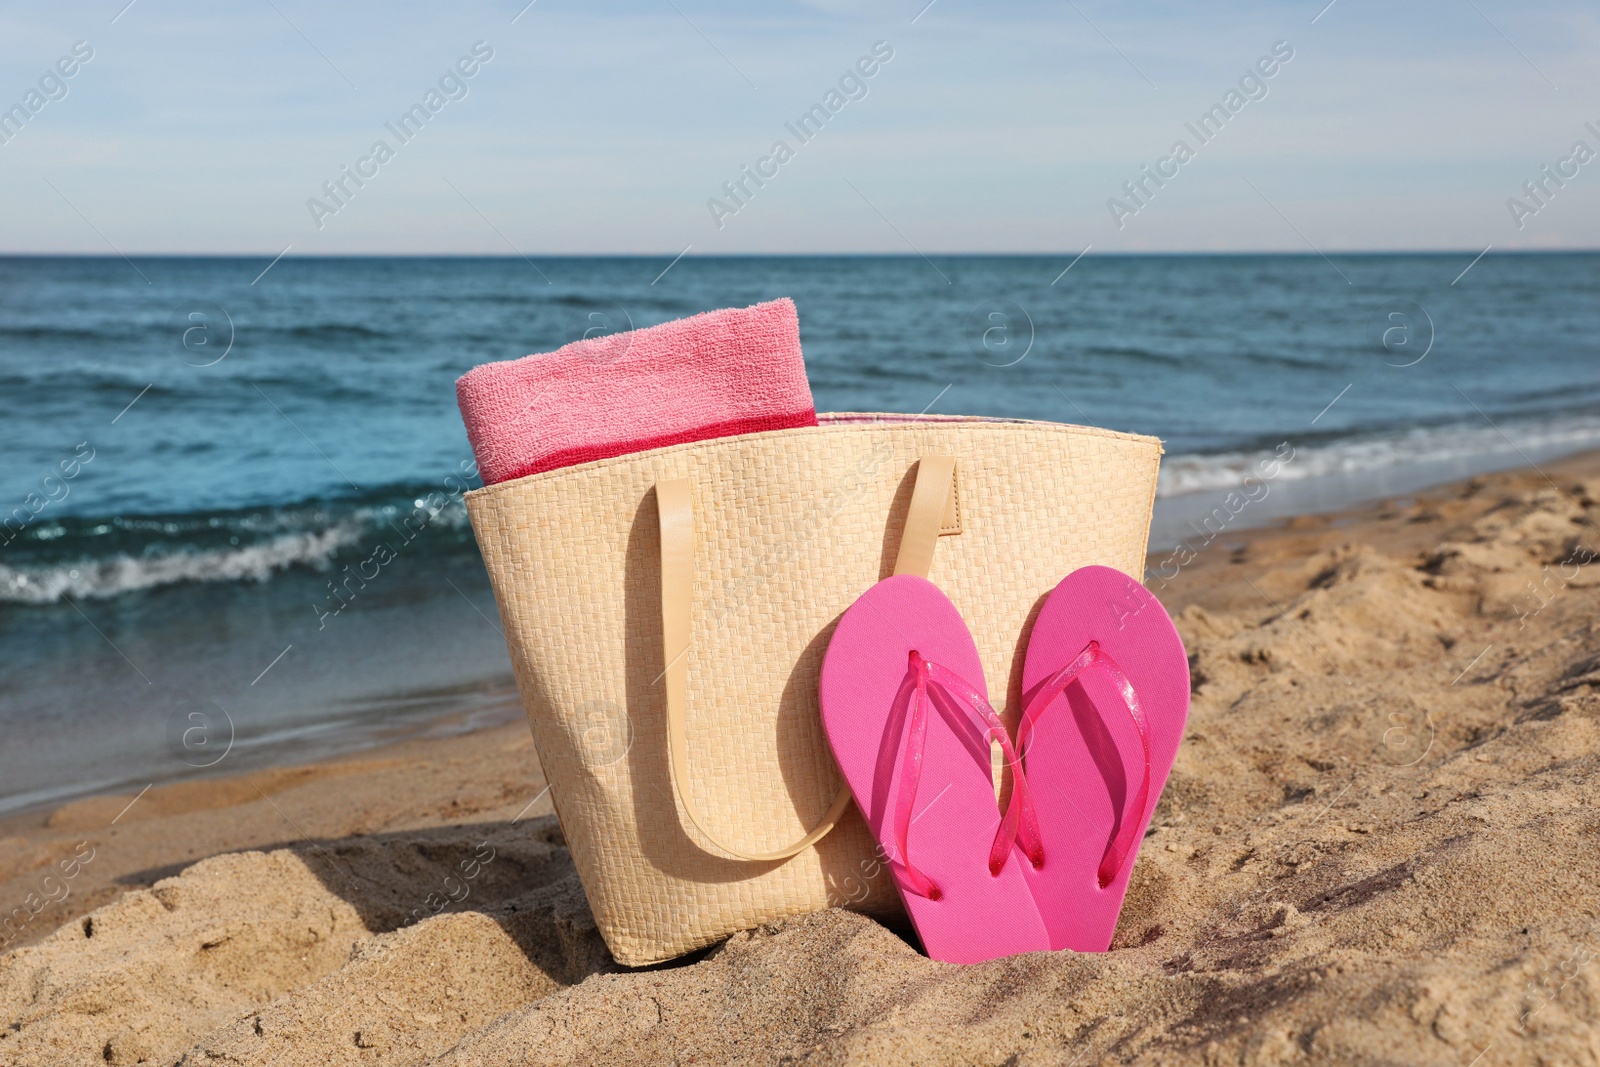 Photo of Summer bag with slippers and beach towel on sand near sea